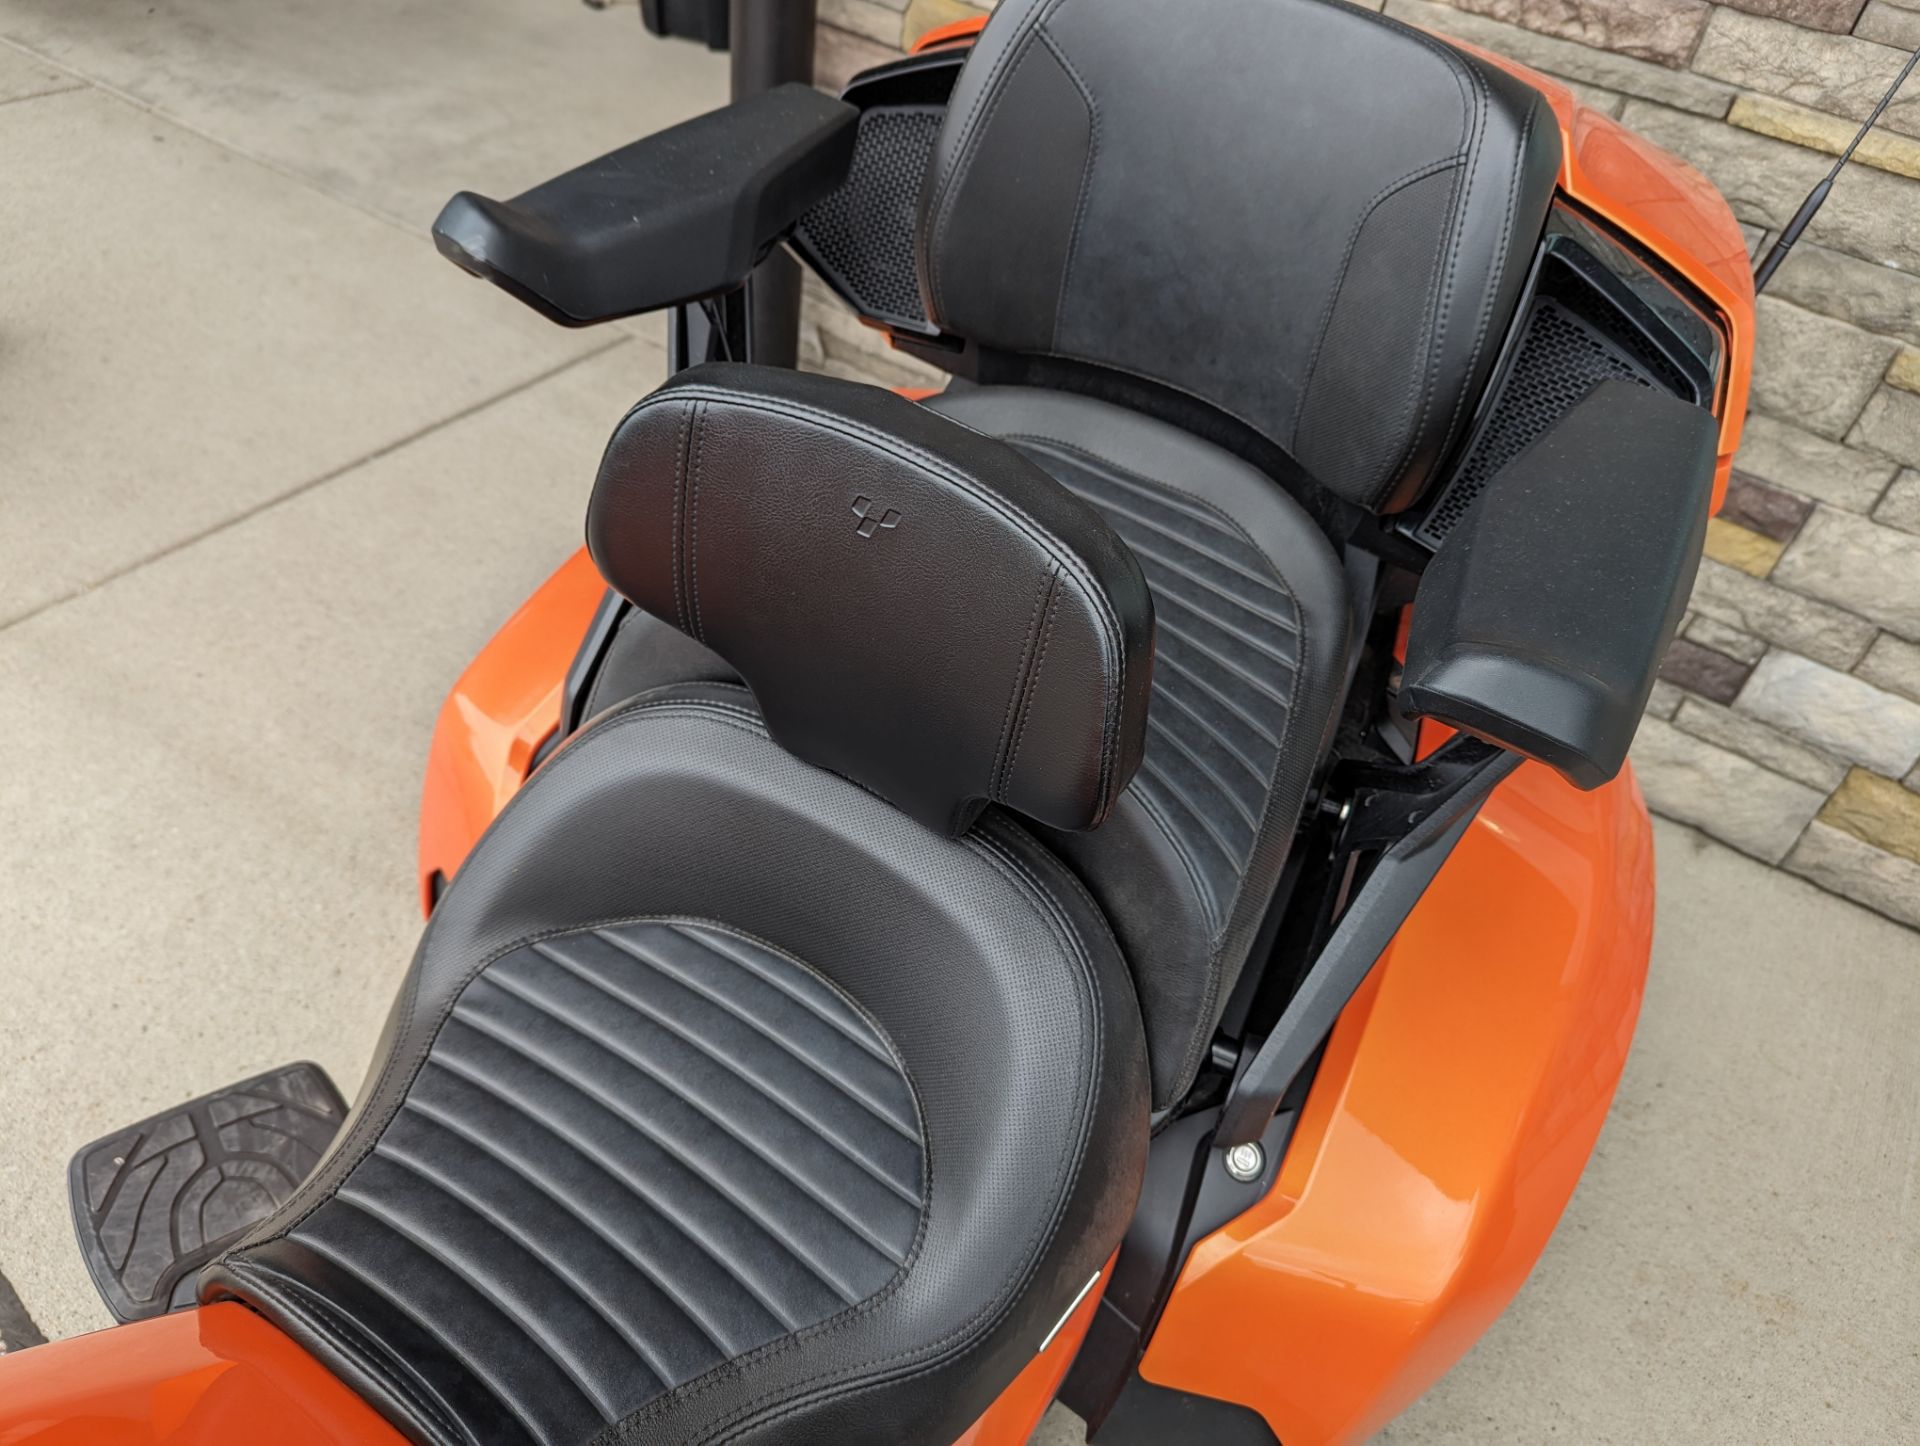 2019 Can-Am Spyder F3 Limited in Rapid City, South Dakota - Photo 9